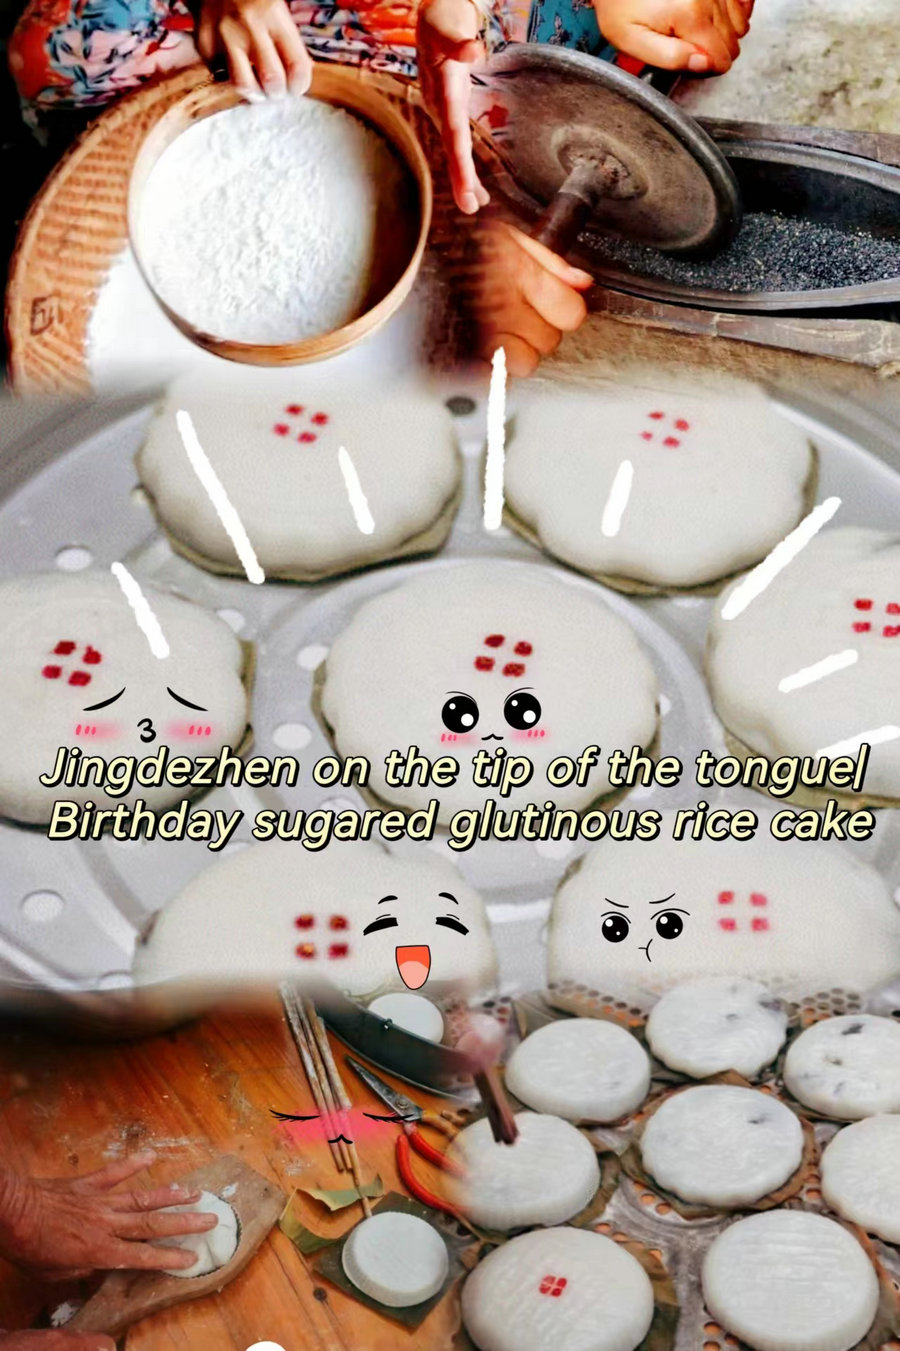 Jingdezhen on the tip of the tongue| Birthday sugared glutinous rice cake